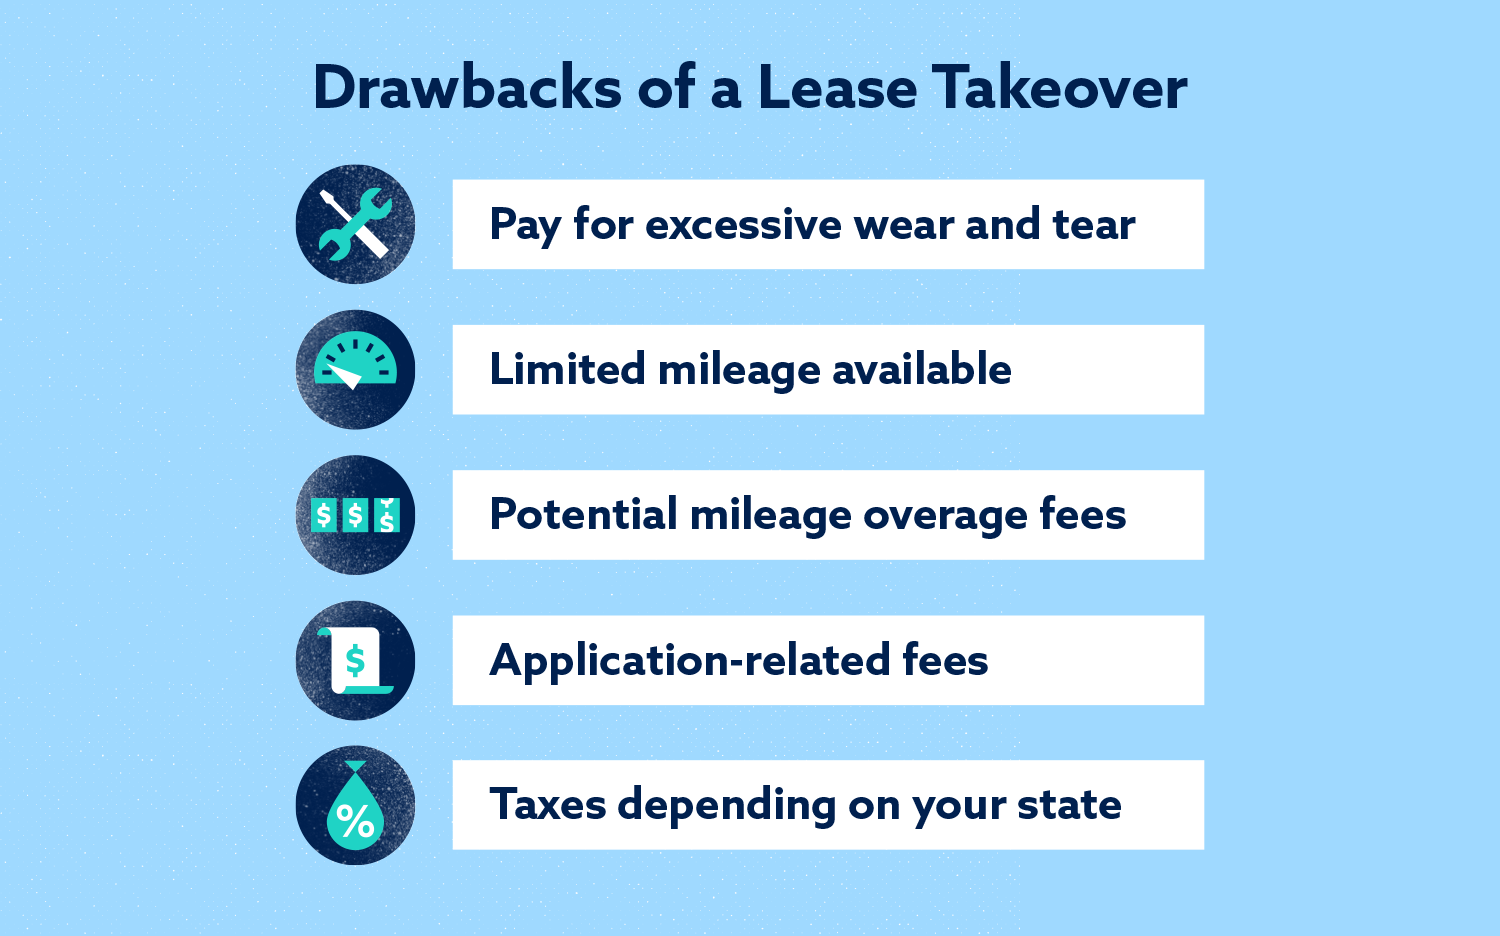 Infographic that illustrates drawbacks of a lease takeover